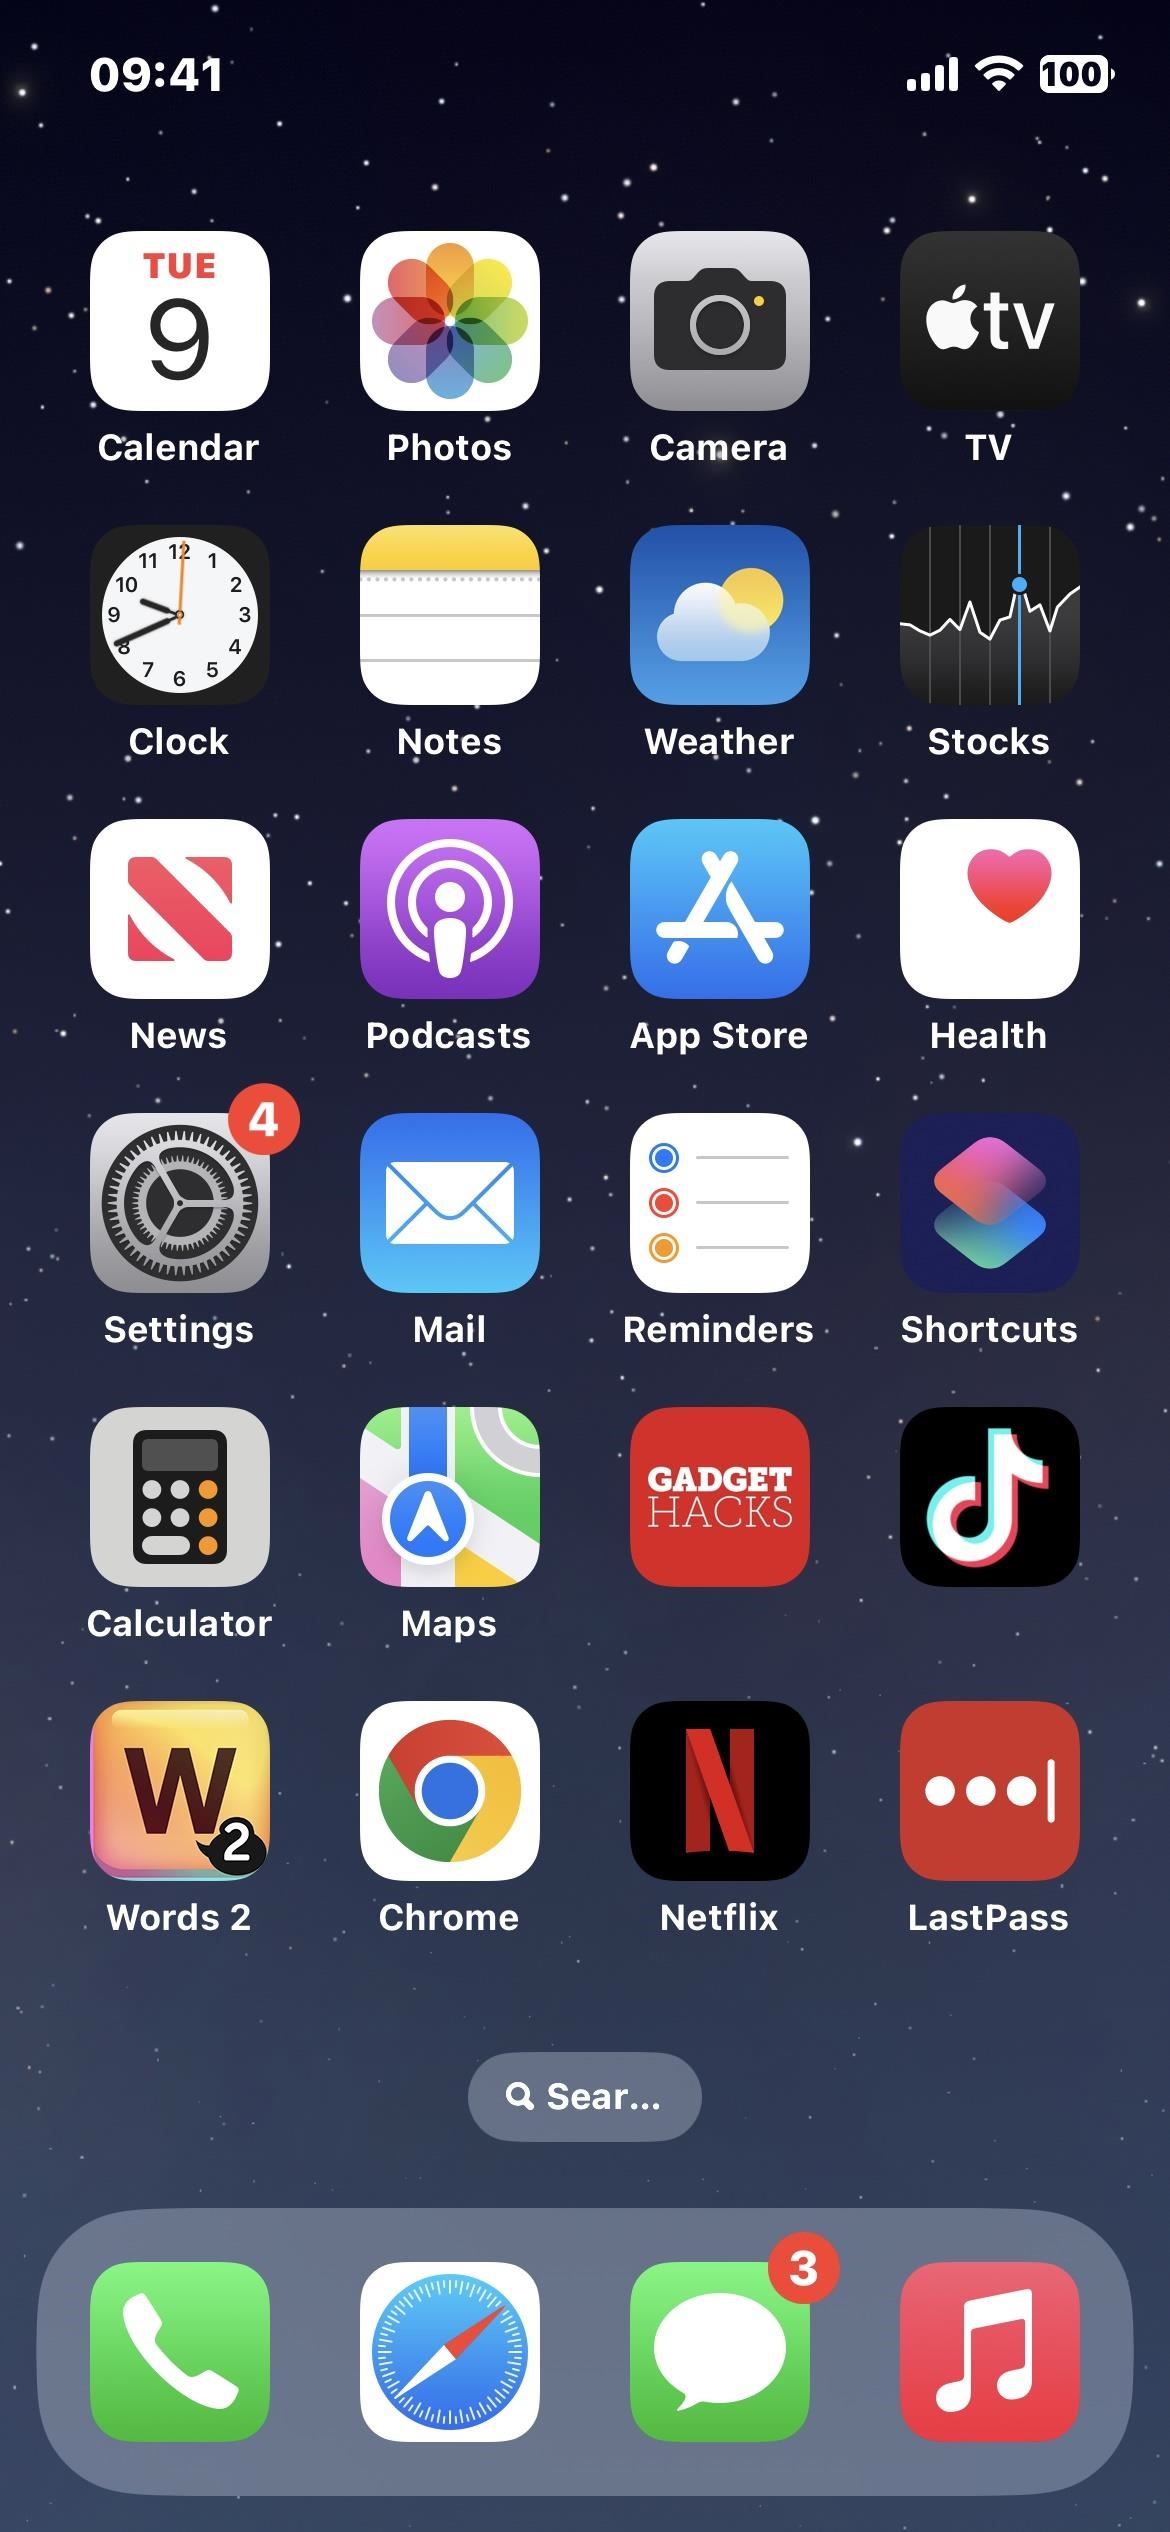 This Hidden Trick Lets You Highlight Your iPhone's Status Bar for a Wider System Look